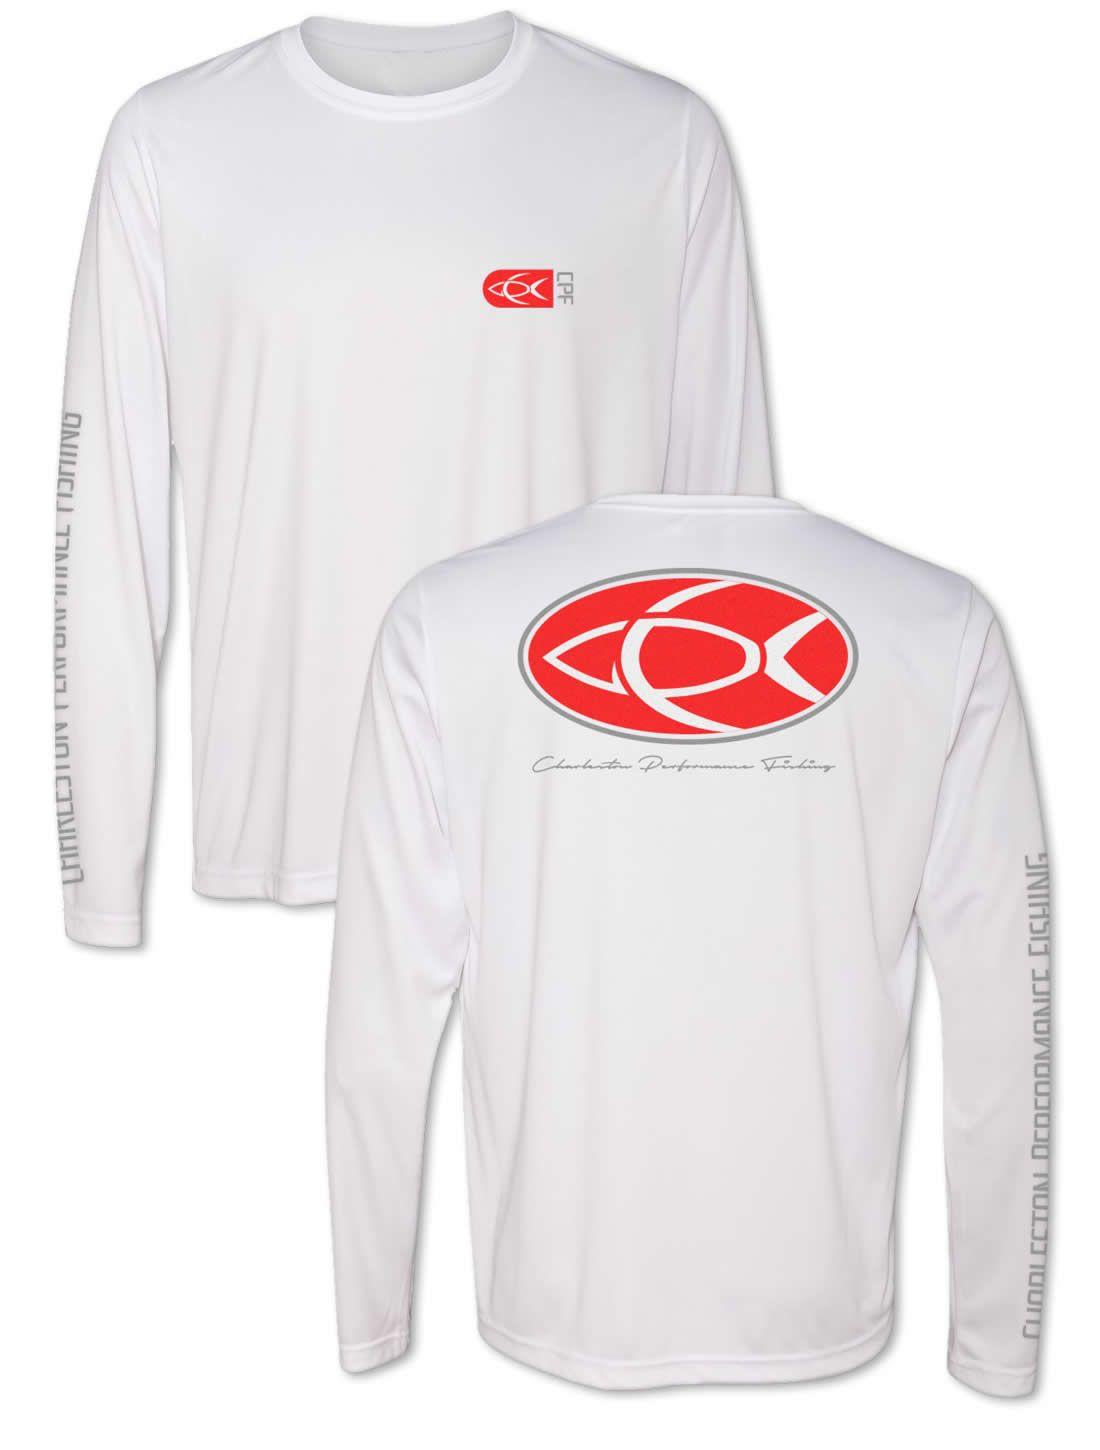 White and Red Oval Logo - Oval Fish Back Red Graphic White Long Sleeve Performance Fishing ...